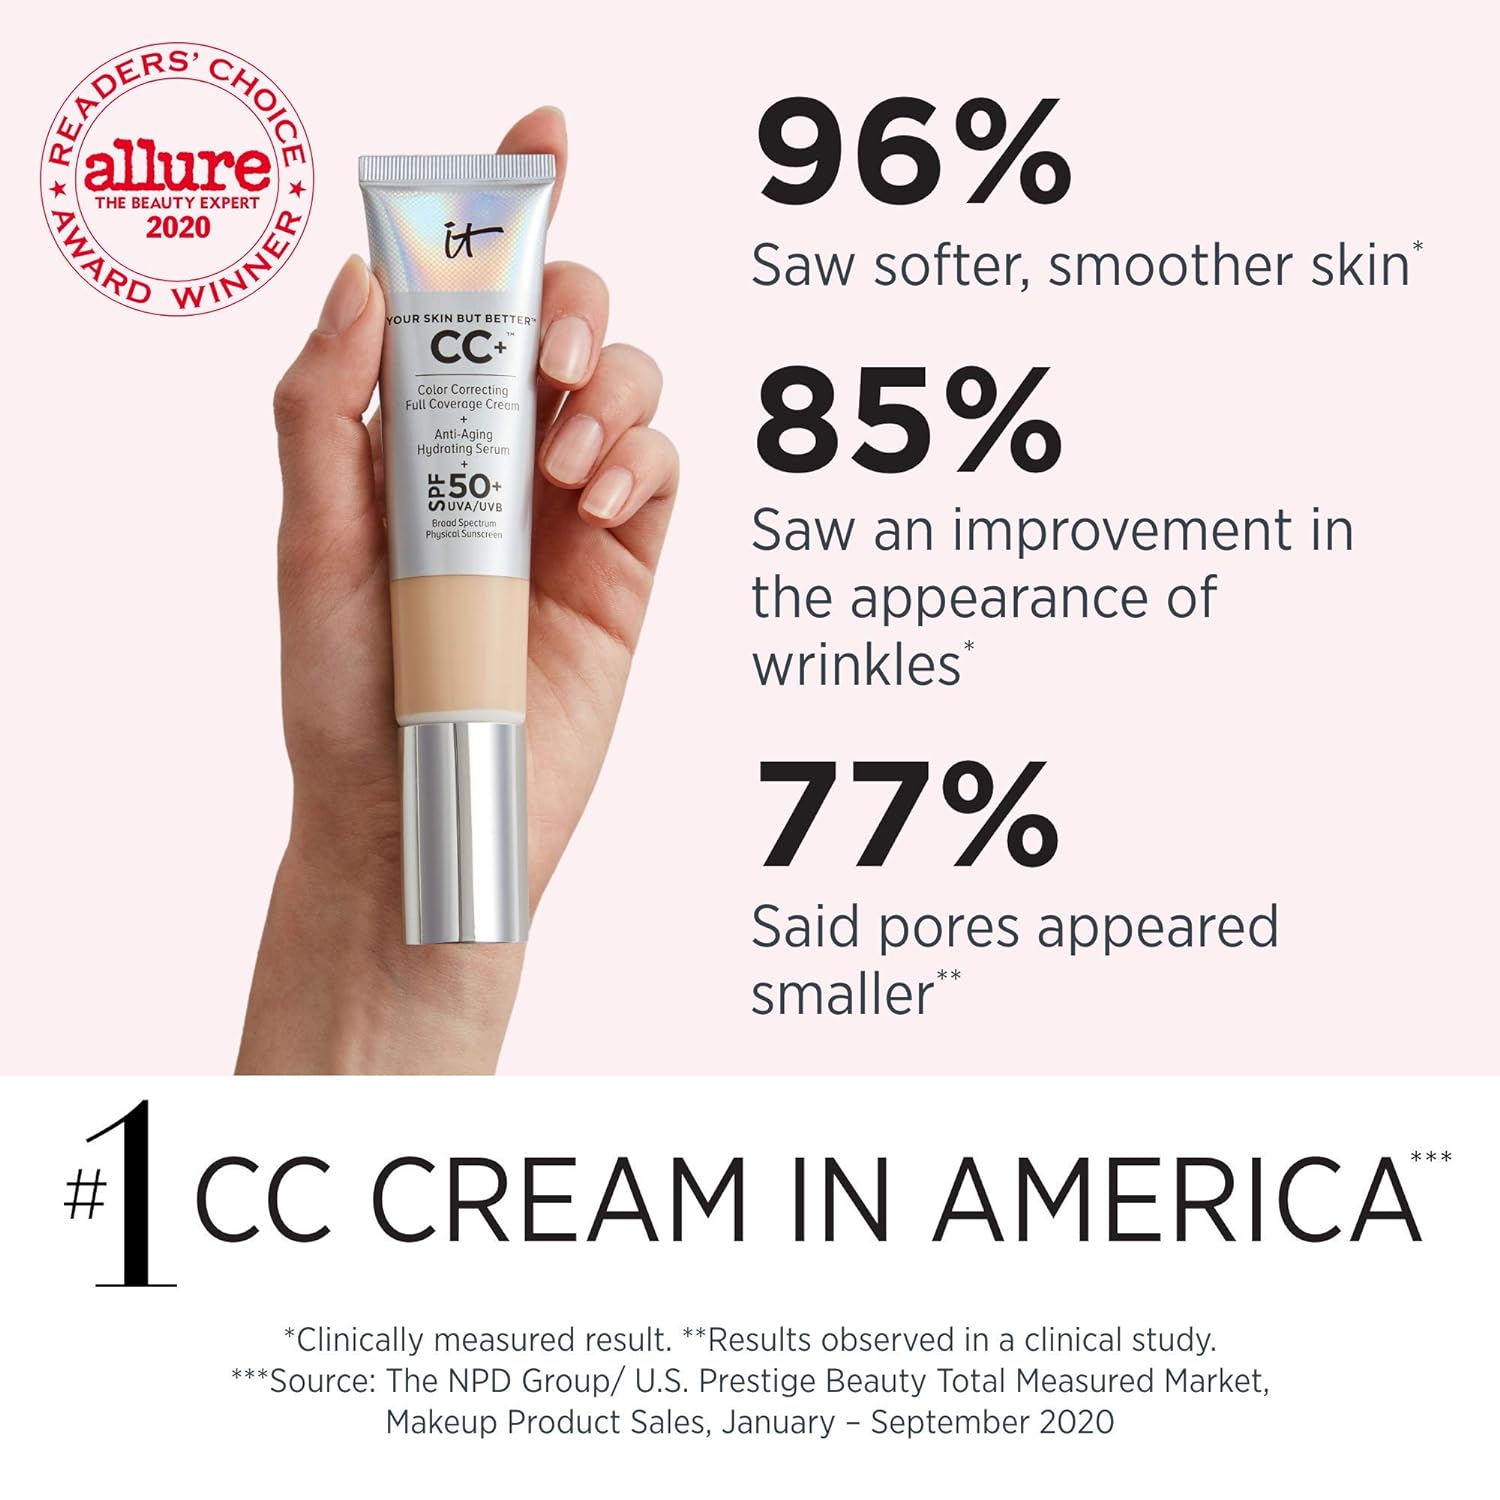  IT Cosmetics Your Skin But Better CC+ Cream Travel Size, Light (W) - Color Correcting Cream, Full-Coverage Foundation, Anti-Aging Serum & SPF 50+ Sunscreen - Natural Finish - 0.406